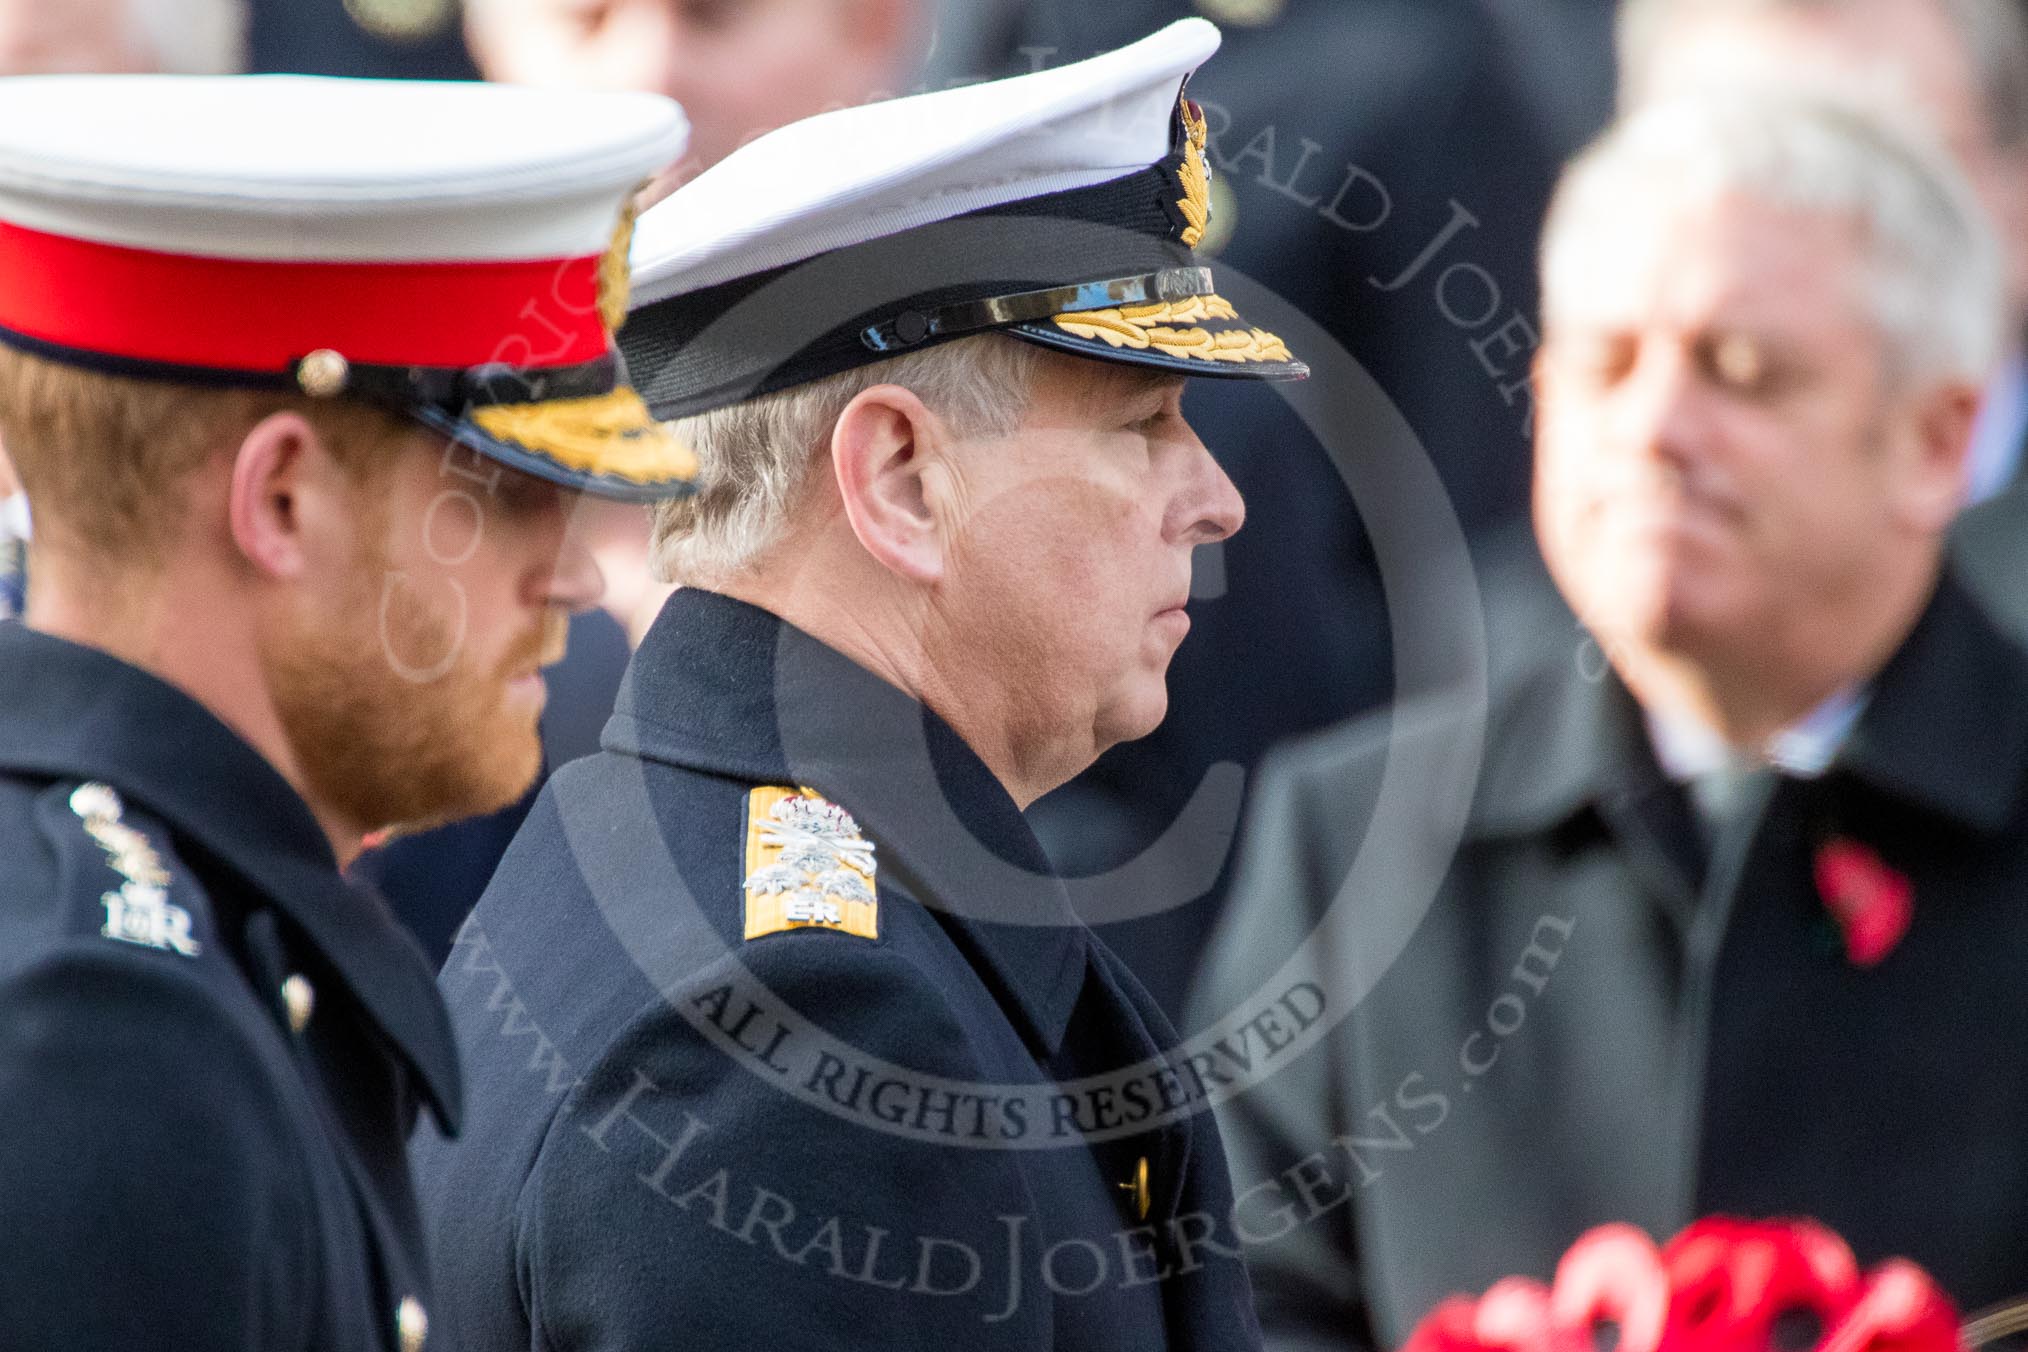 HRH The Duke of York (Prince Andrew) after laying a wreath during the Remembrance Sunday Cenotaph Ceremony 2018 at Horse Guards Parade, Westminster, London, 11 November 2018, 11:06.